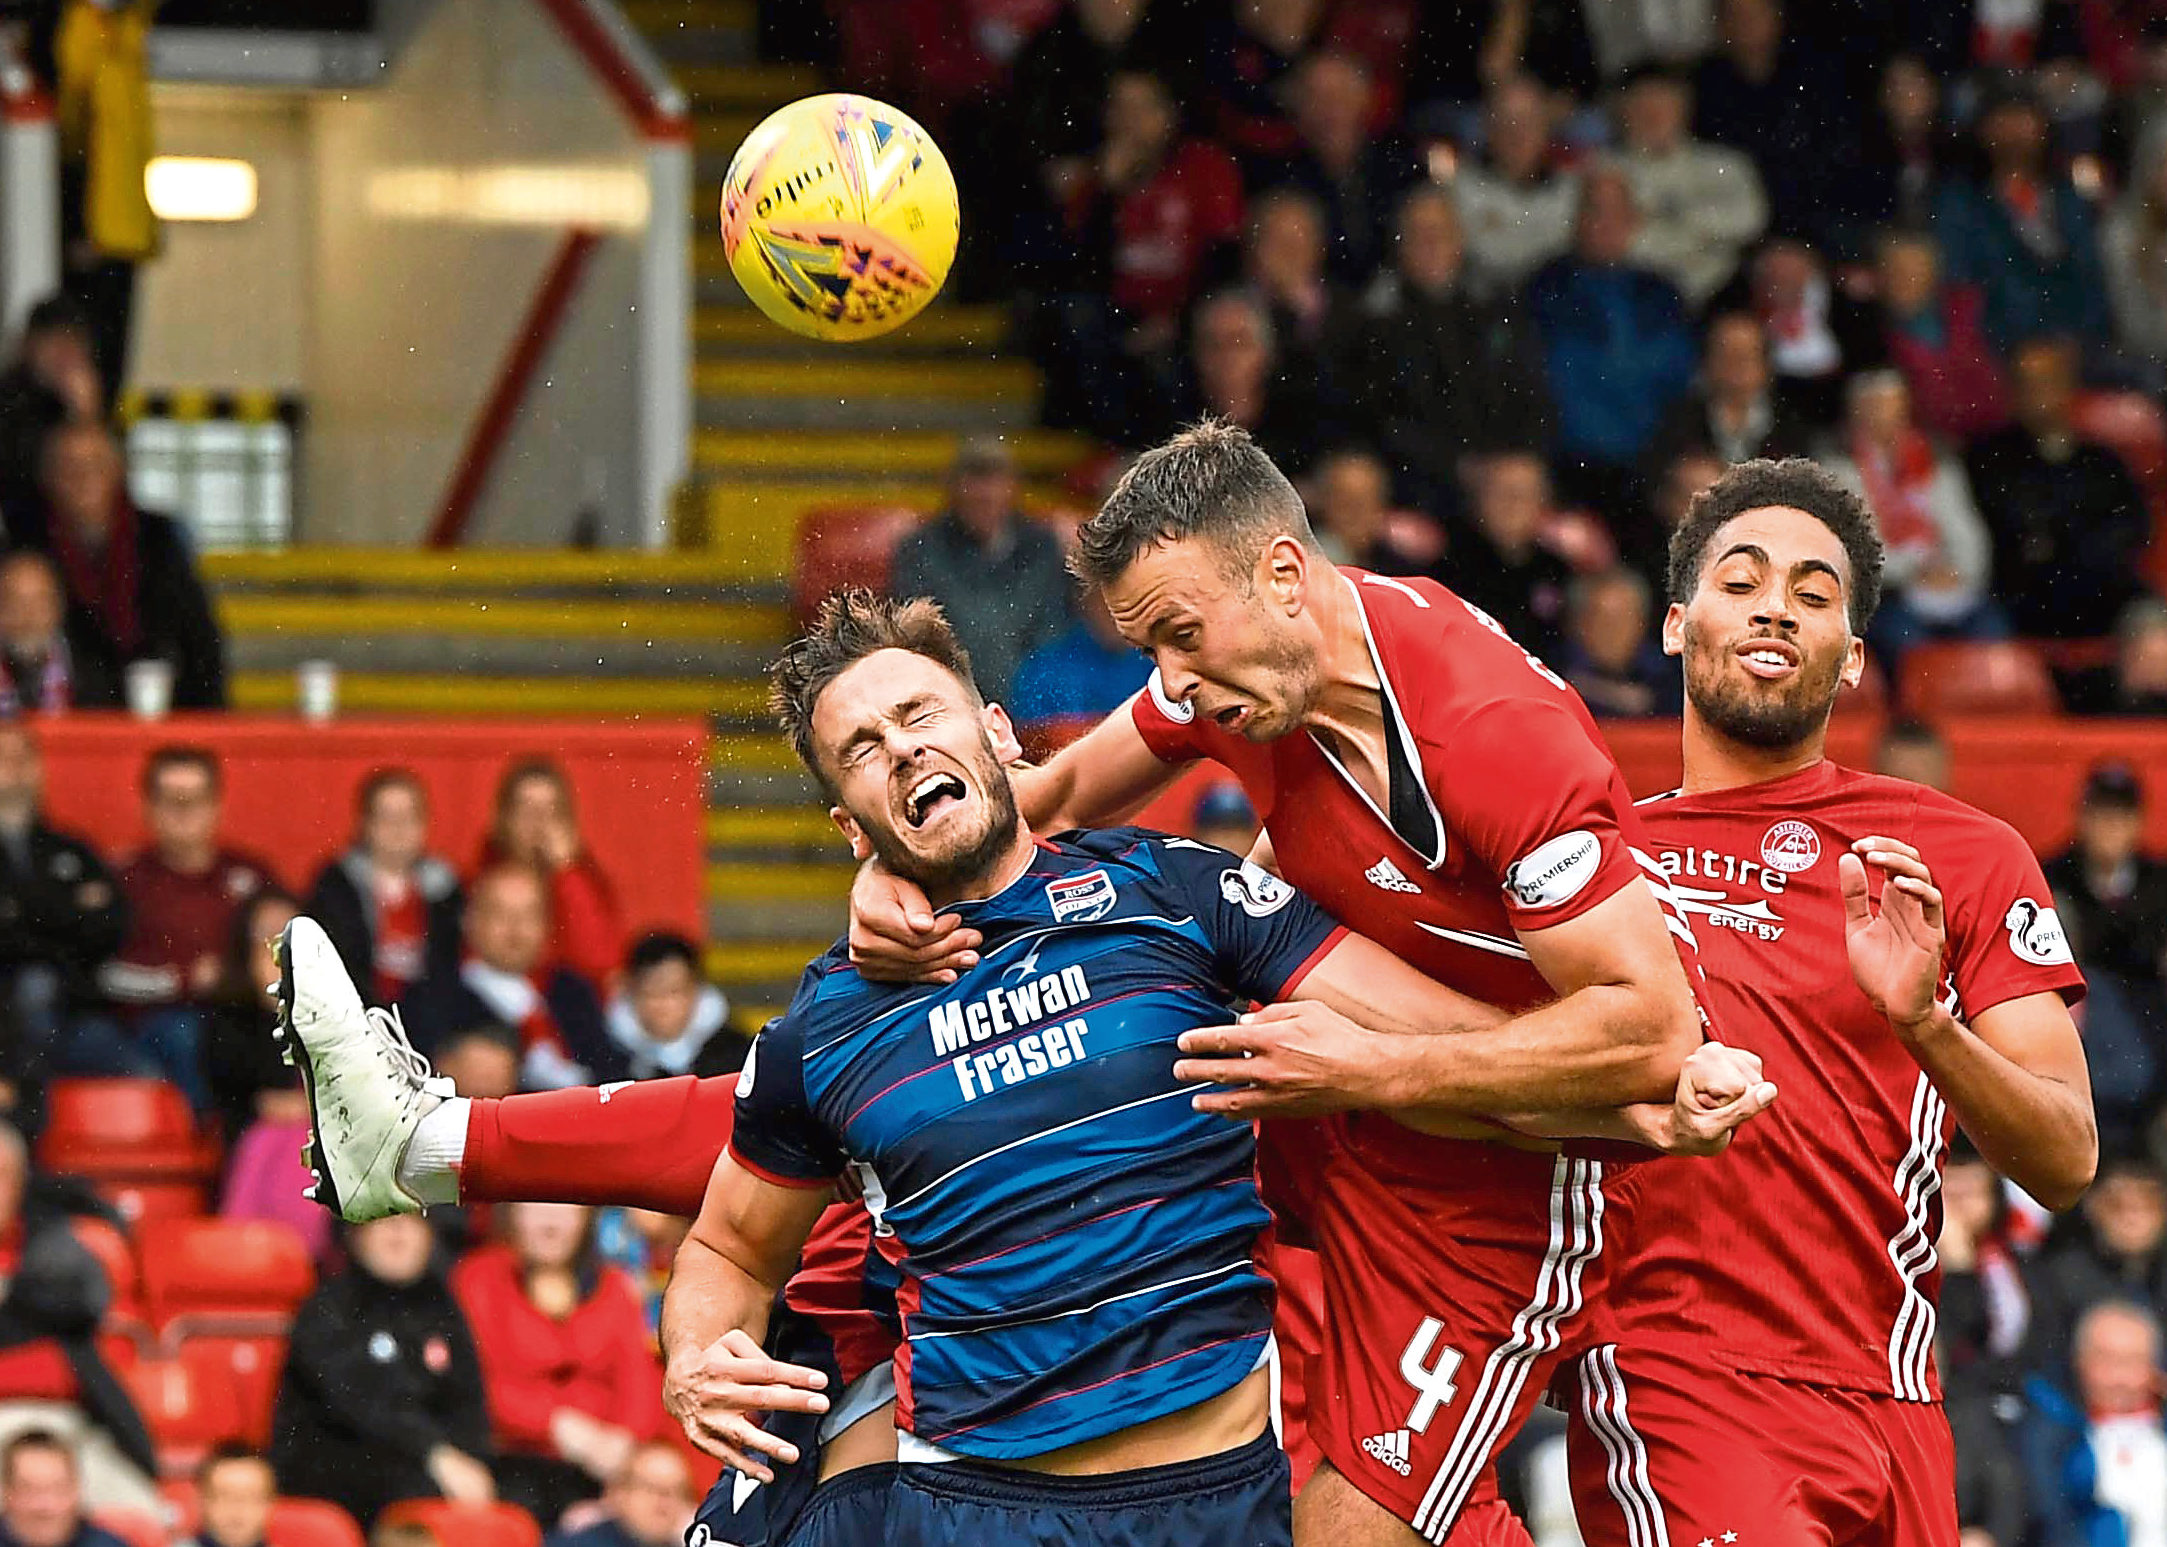 Aberdeen's Andrew Considine (C) competes with Keith Watson for the ball during the Ladbrokes Premiership match between Aberdeen and Ross County at Pittodrie Stadium on August 31